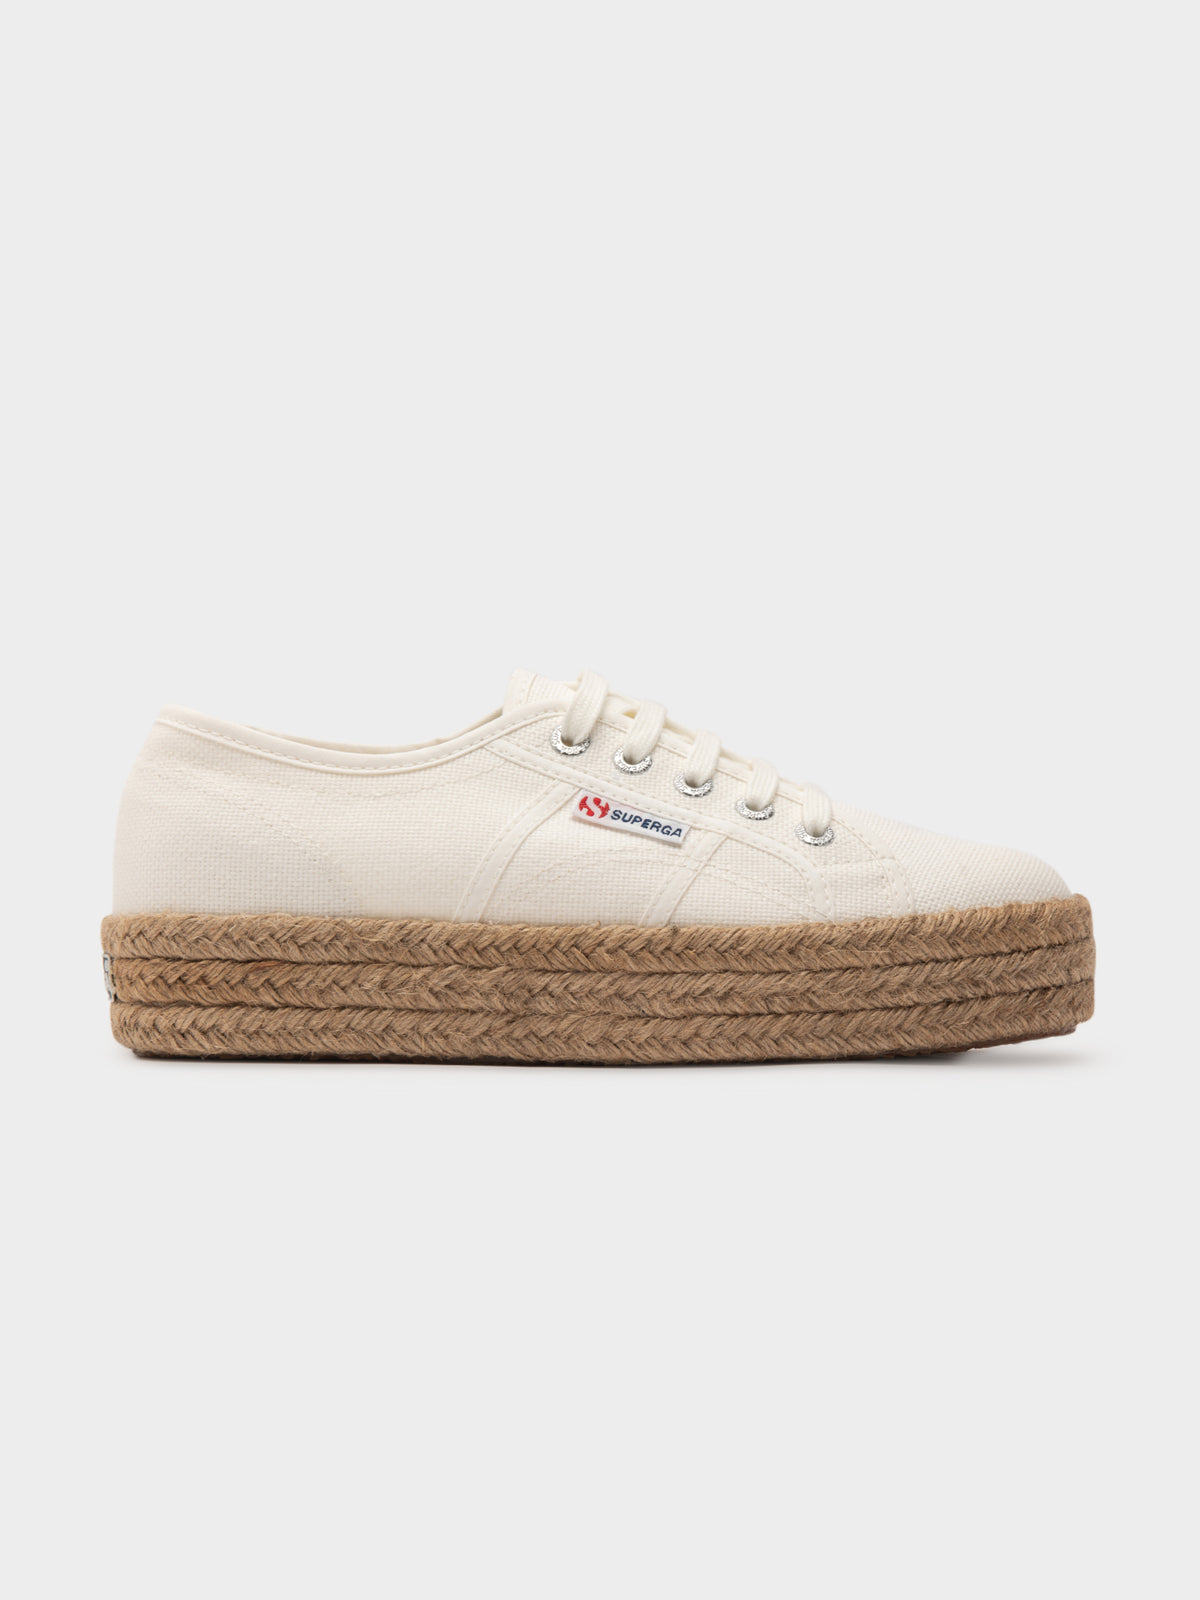 Womens 2730 Cotropew Sneakers in Off White